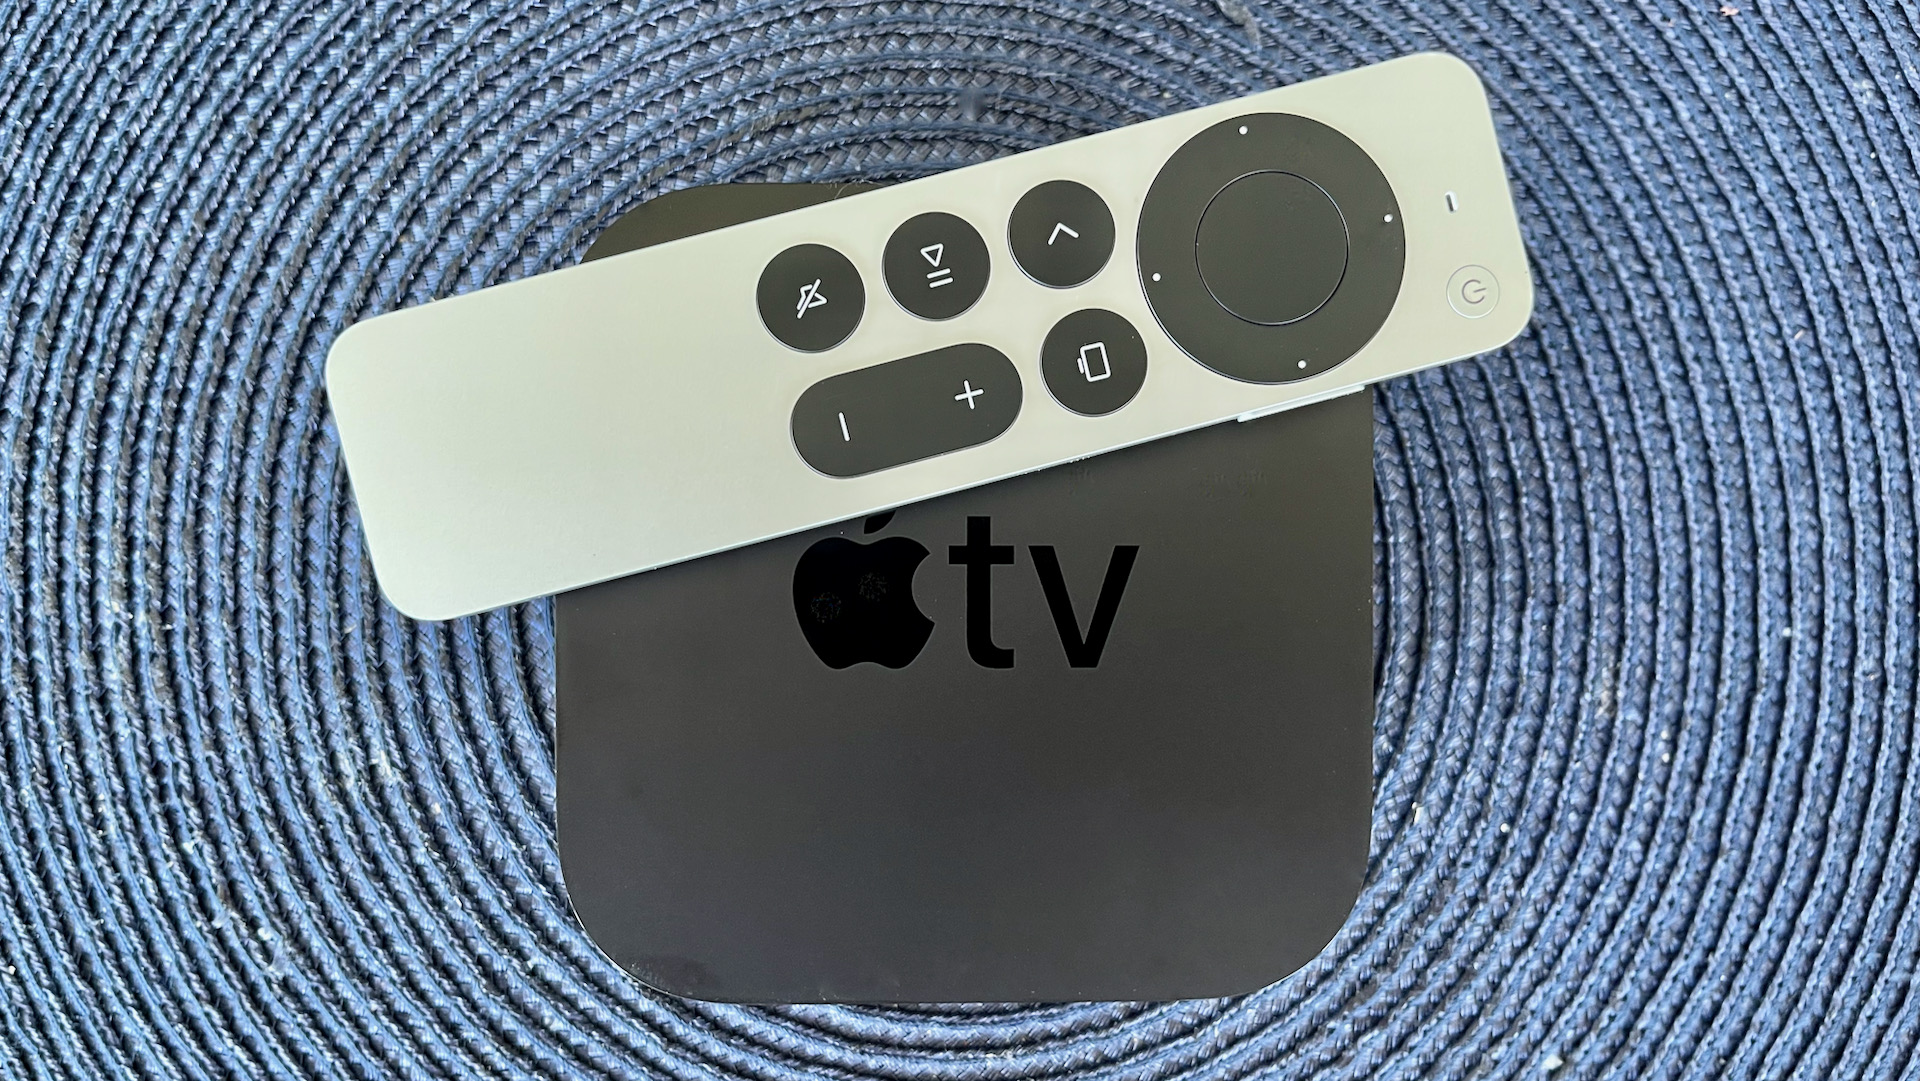 An Apple TV 4K streaming box with its remote resting on top of it.